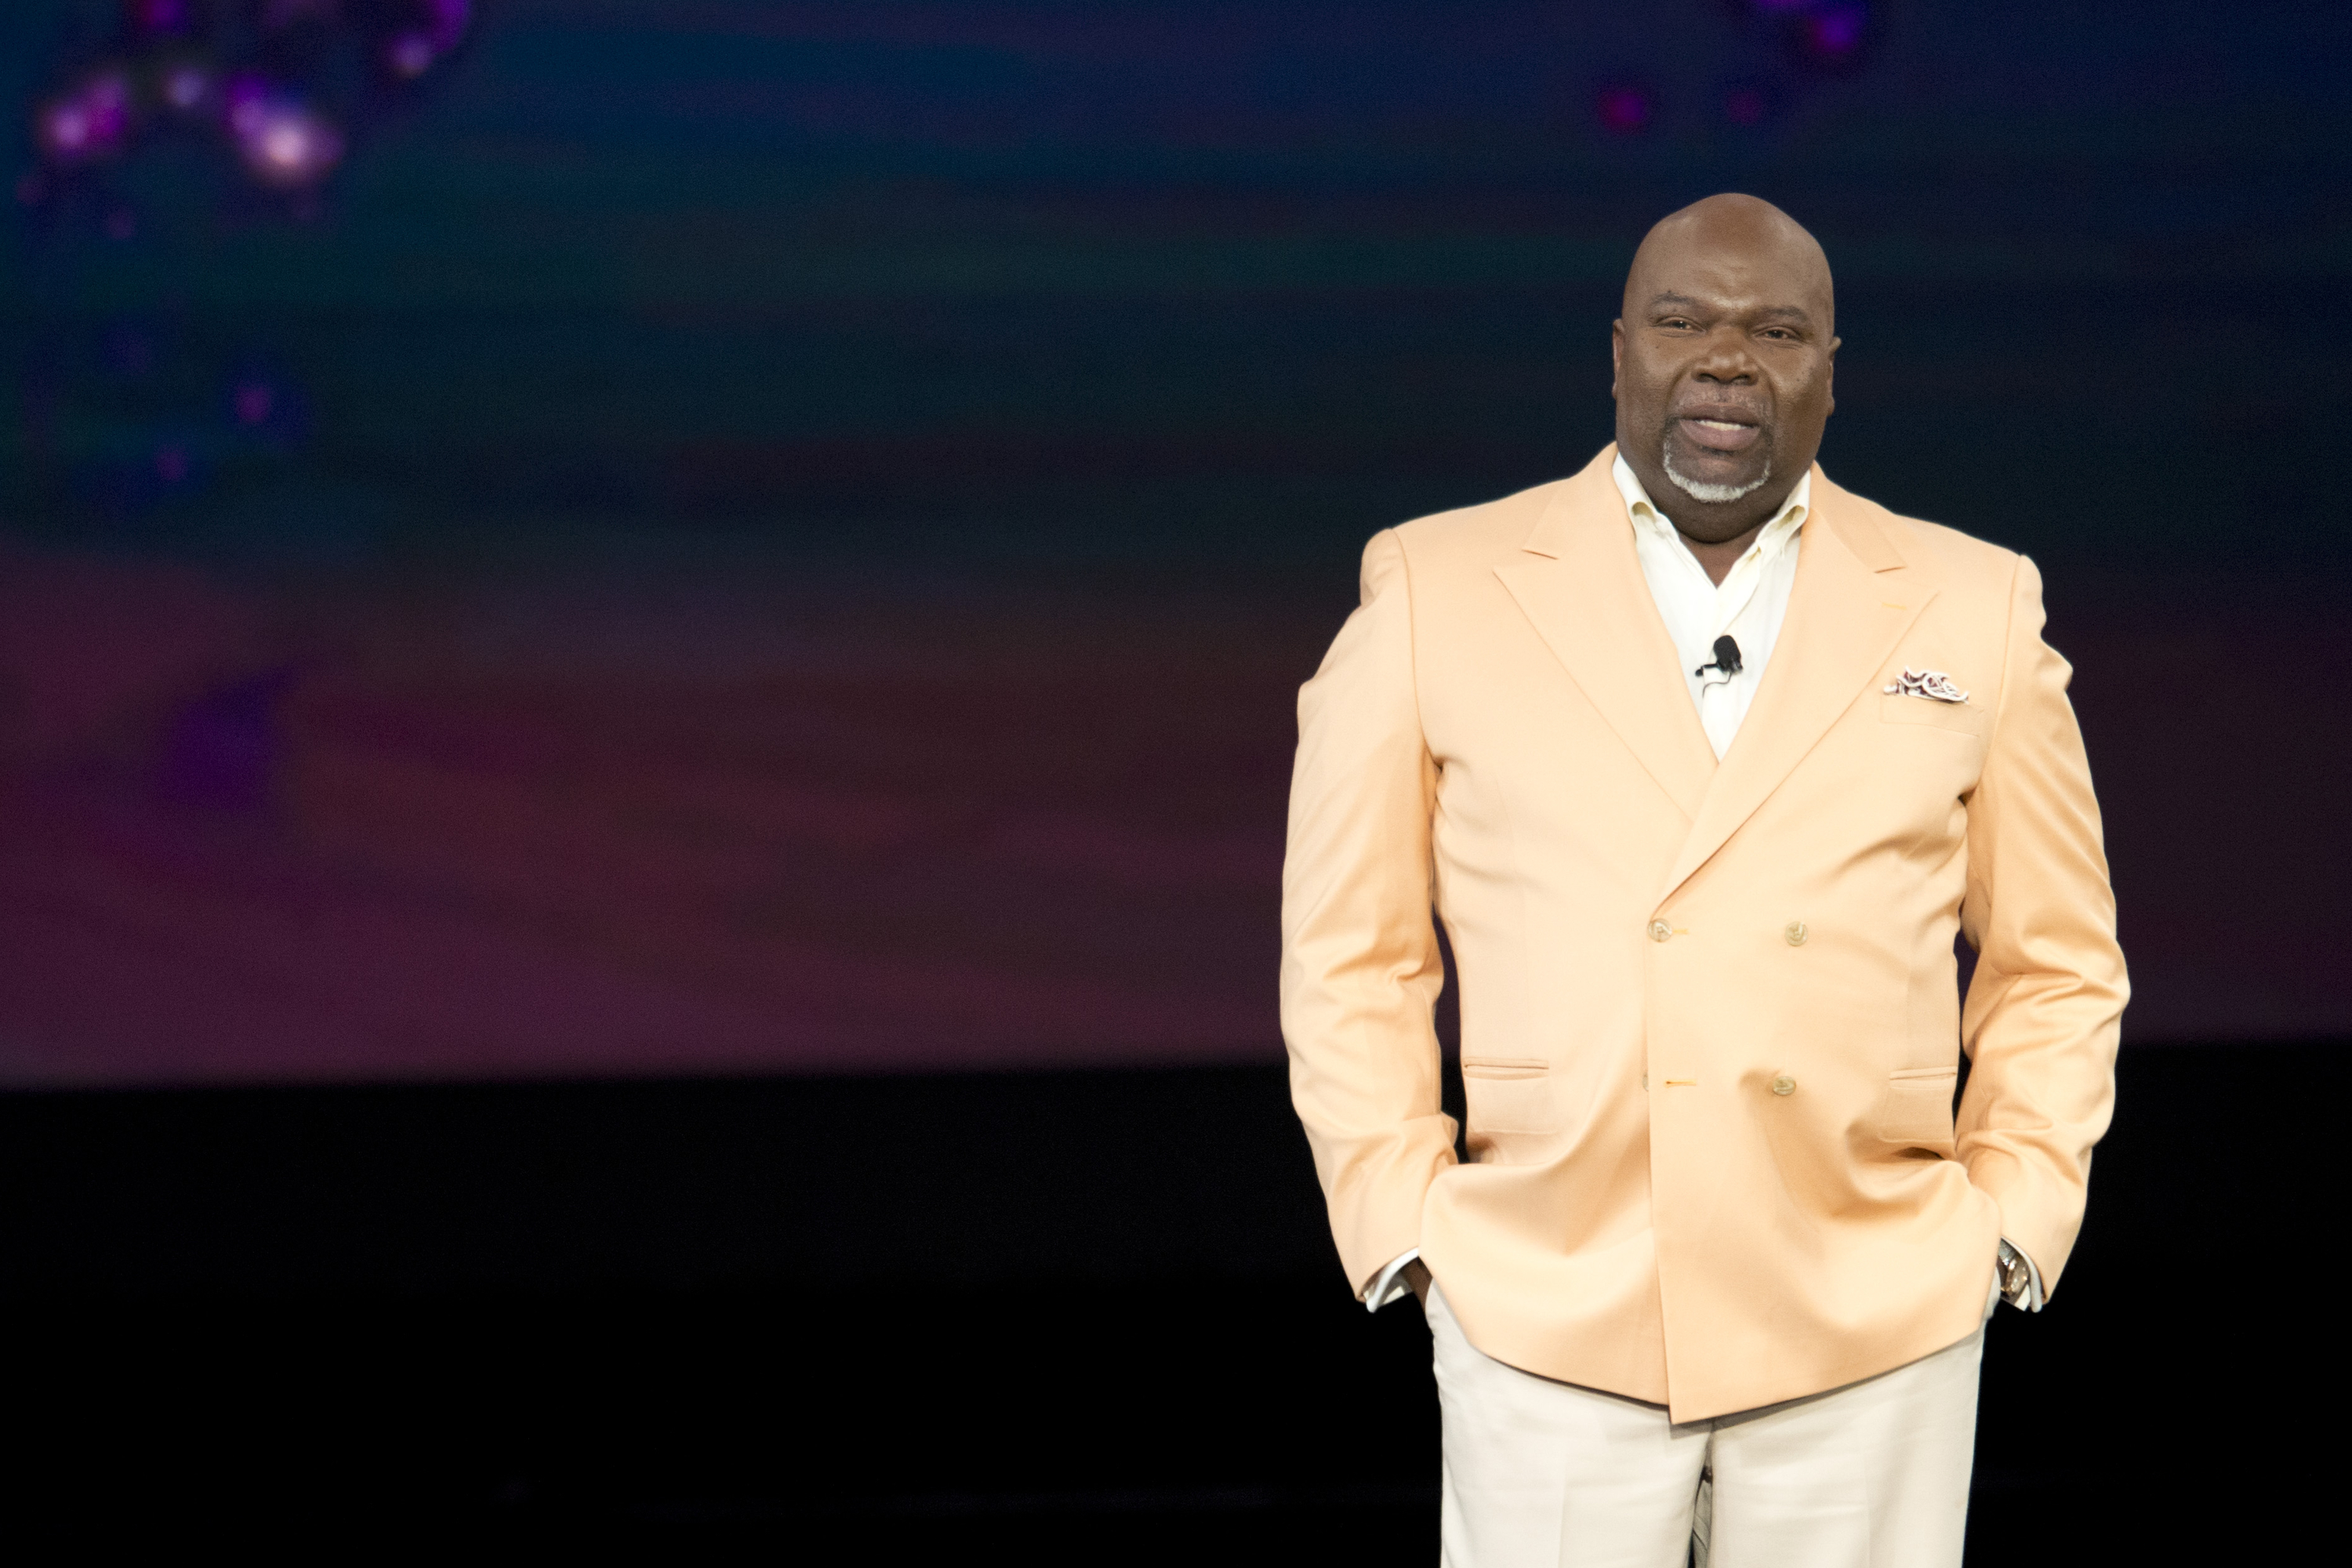 Bishop T.D. Jakes: ‘Parents Have Not Raised Their Kids In Church’